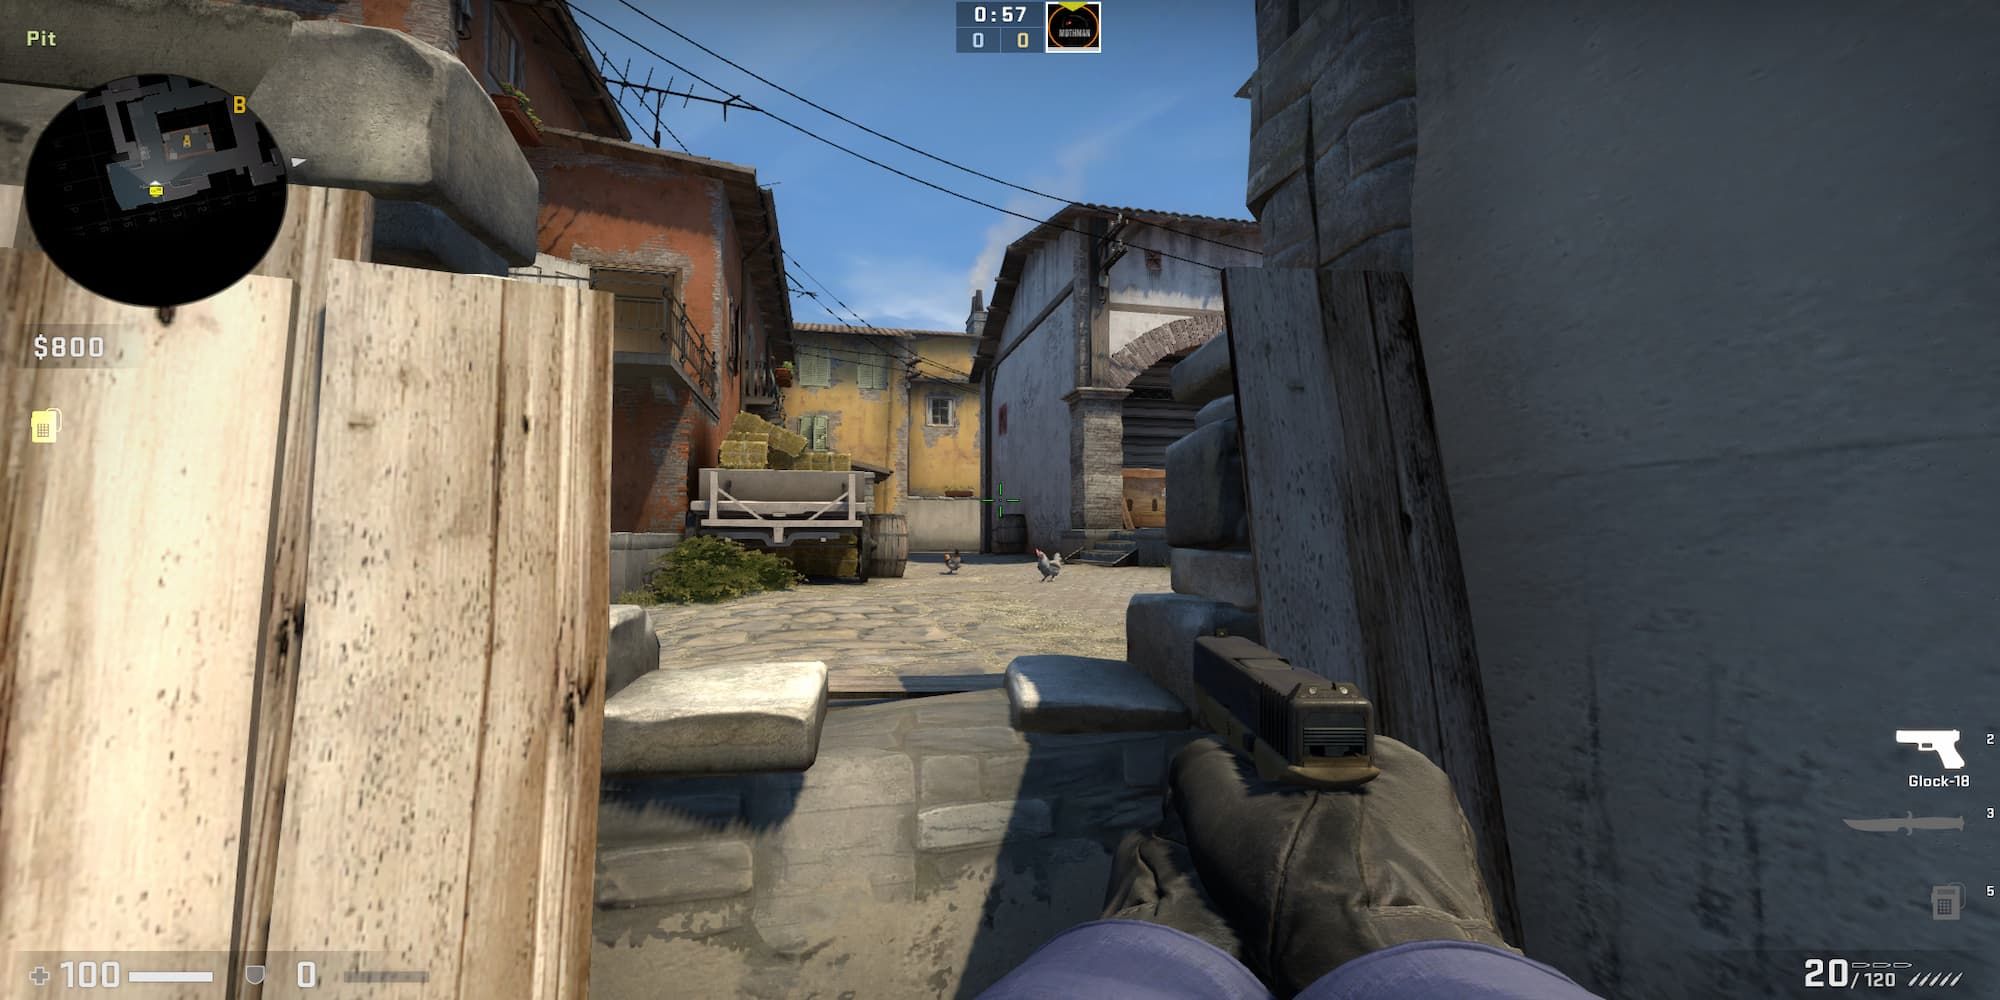 The CS:GO player peeks through the broken wall at the Pit on Inferno.